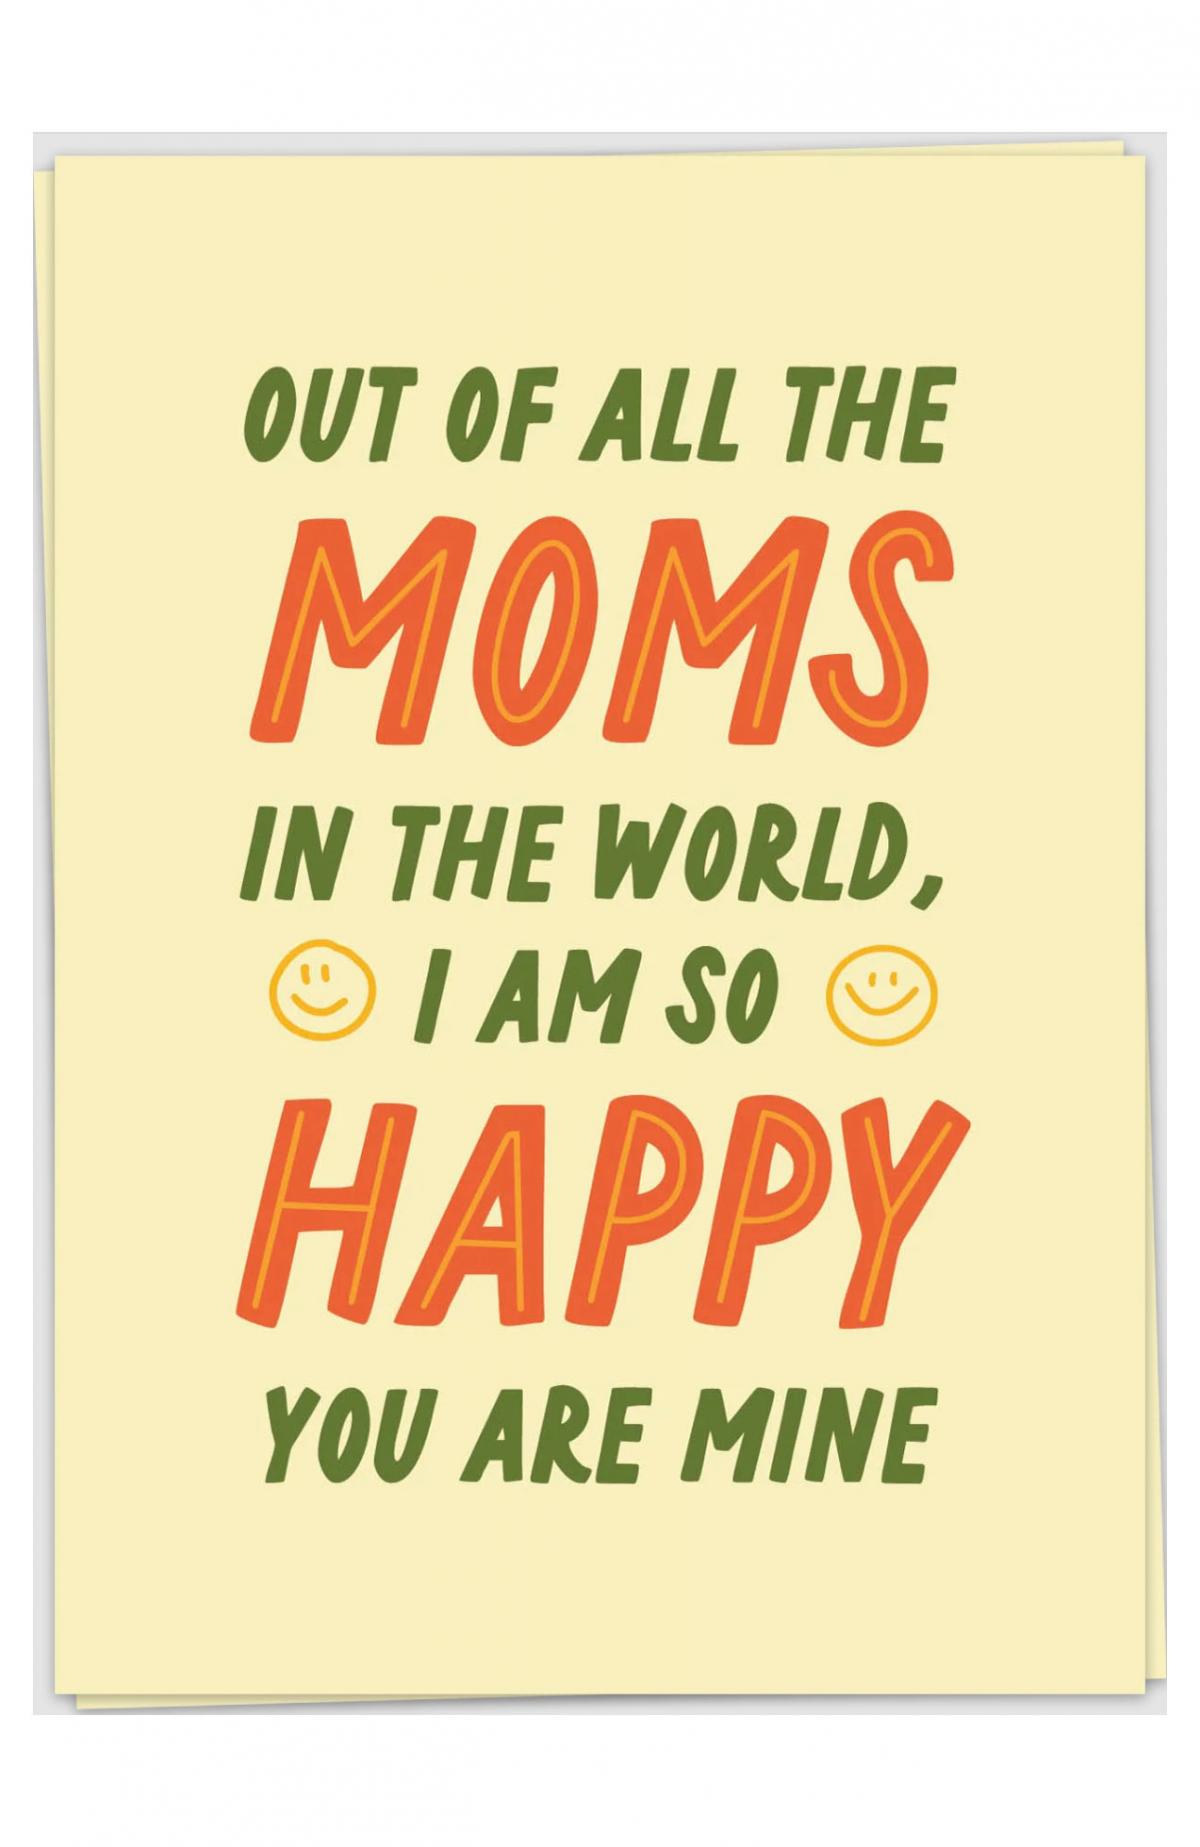 ‘Out of all the moms I’m so happy you are mine’